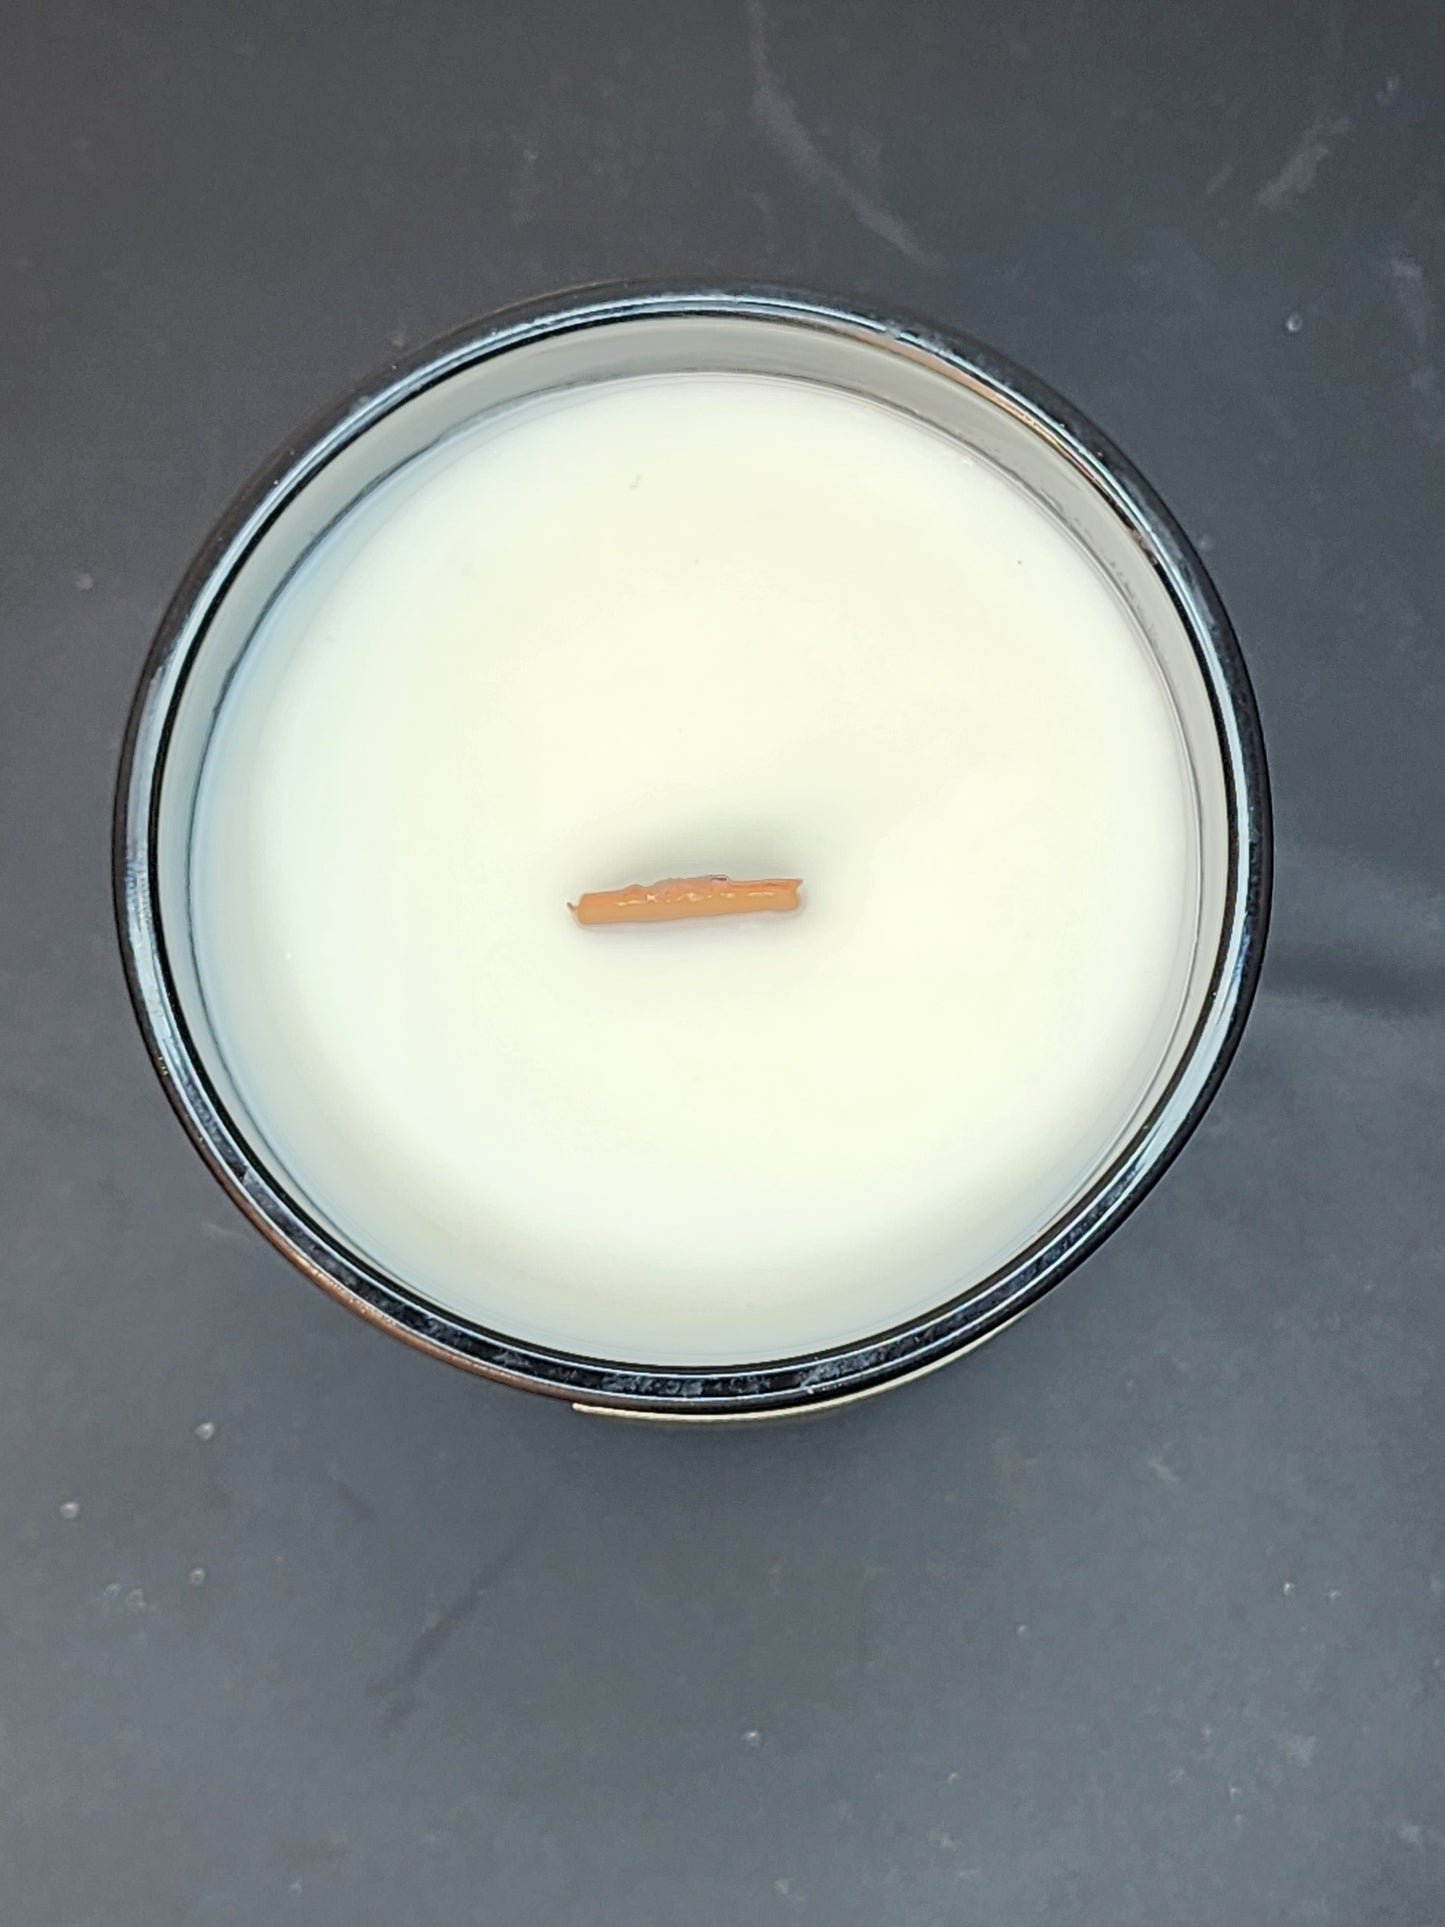 Back To My Roots | Soy Wax Candle